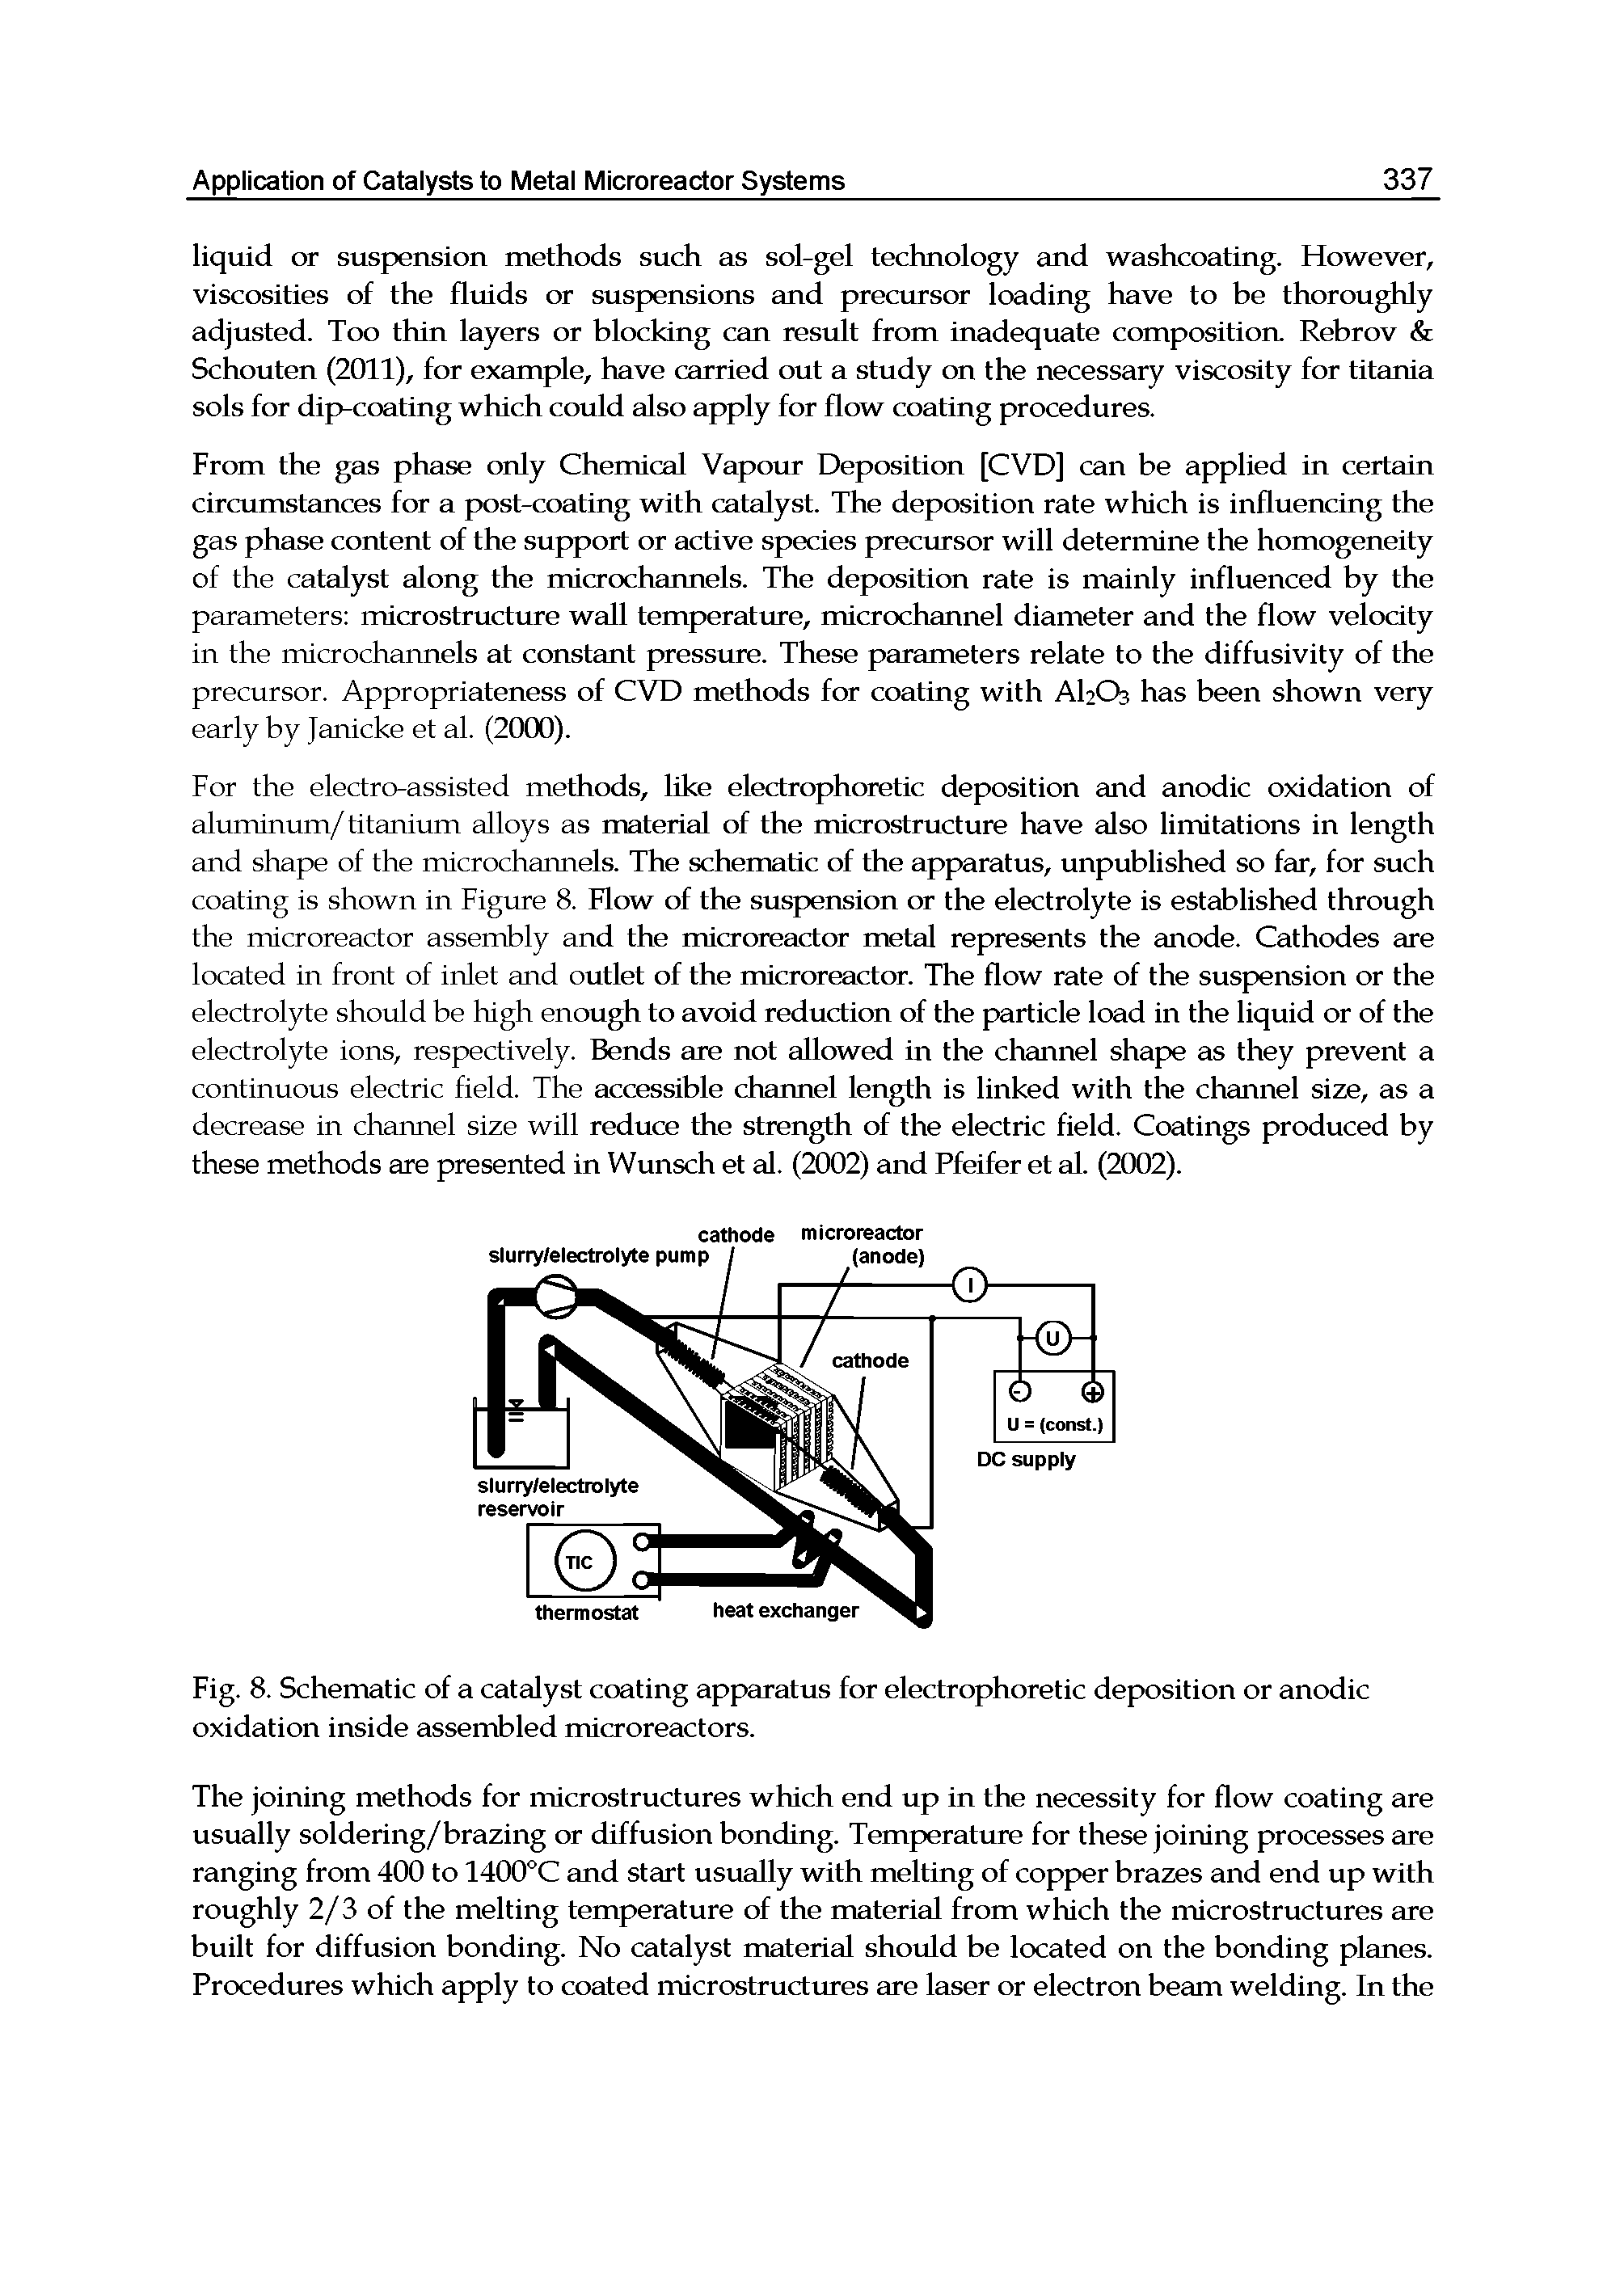 Fig. 8. Schematic of a catalyst coating apparatus for electrophoretic deposition or anodic oxidation inside assembled microreactors.